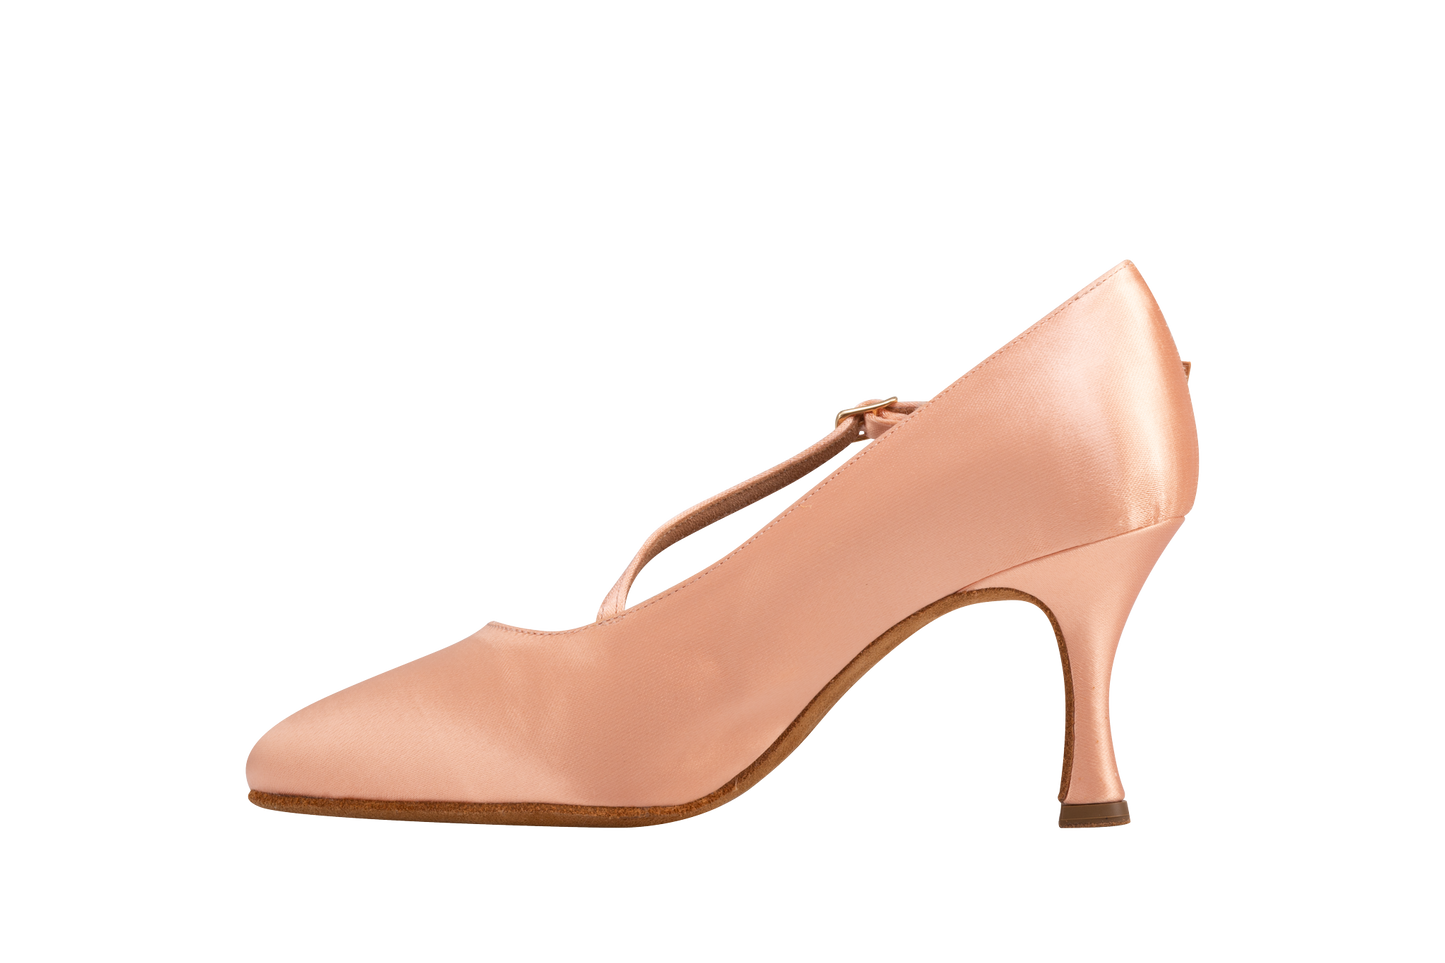 Dance Naturals 220 Elena Flesh Satin Ladies Ballroom Dance Shoe with Rounded Toe and Diagonal Strap